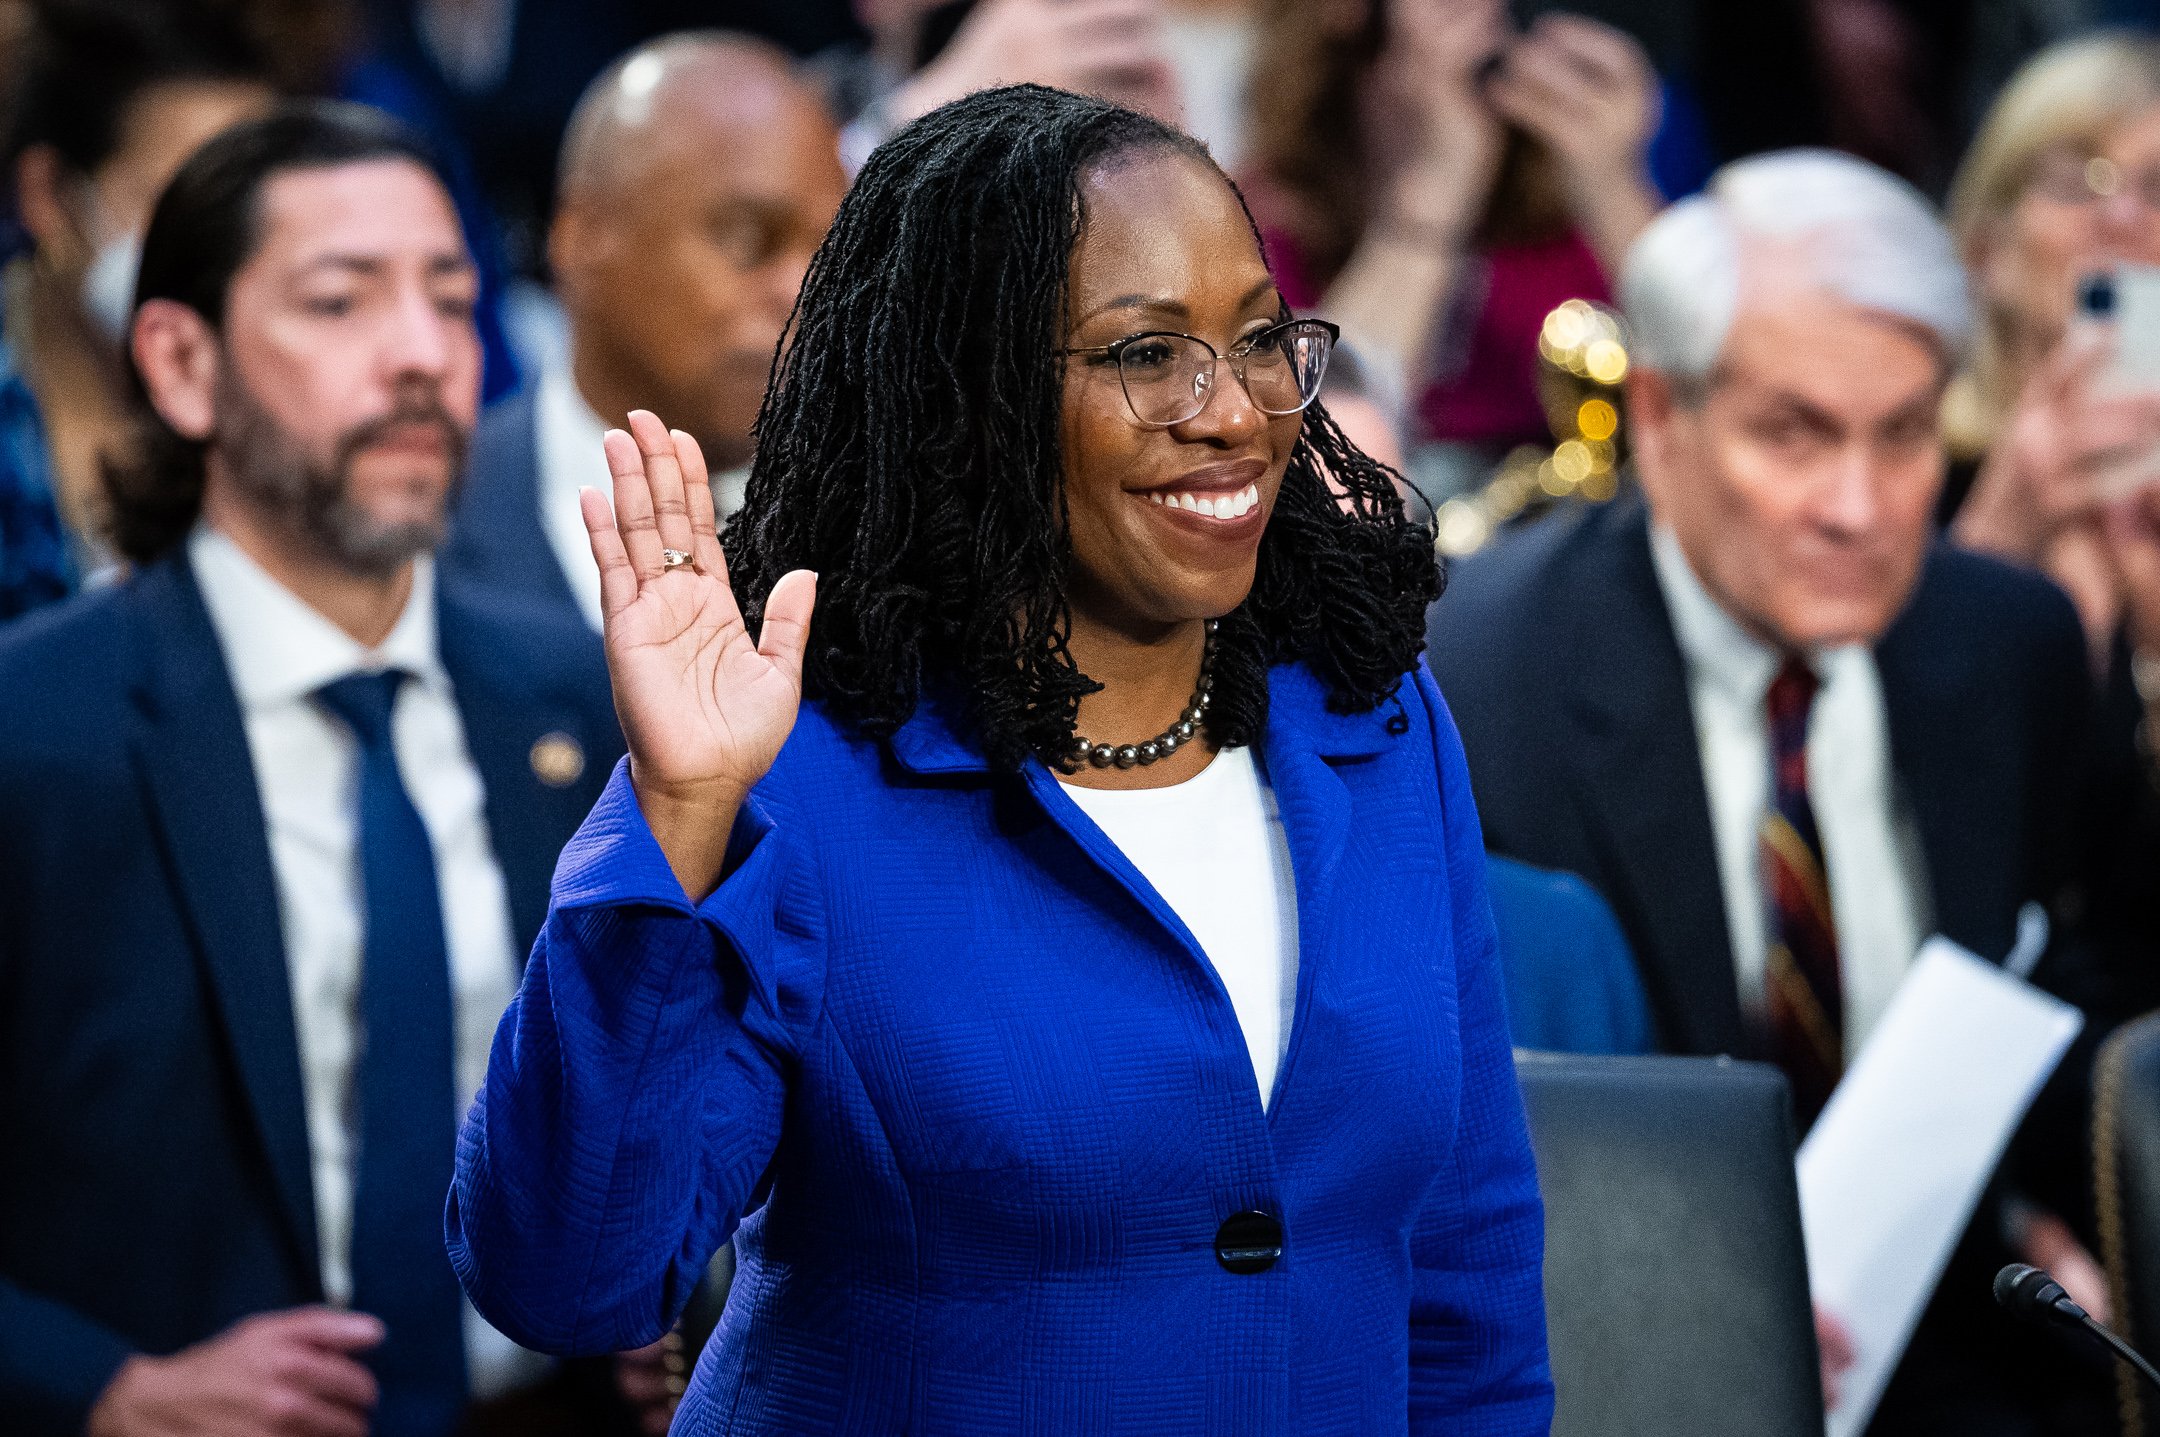  Supreme Court nominee Judge Ketanji Brown Jackson is sworn-in during Senate Judiciary Committee confirmation hearings for her nomination to the Supreme Court, at the U.S. Capitol, in Washington, D.C., on March 21, 2022. (Graeme Sloan for Sipa USA) 